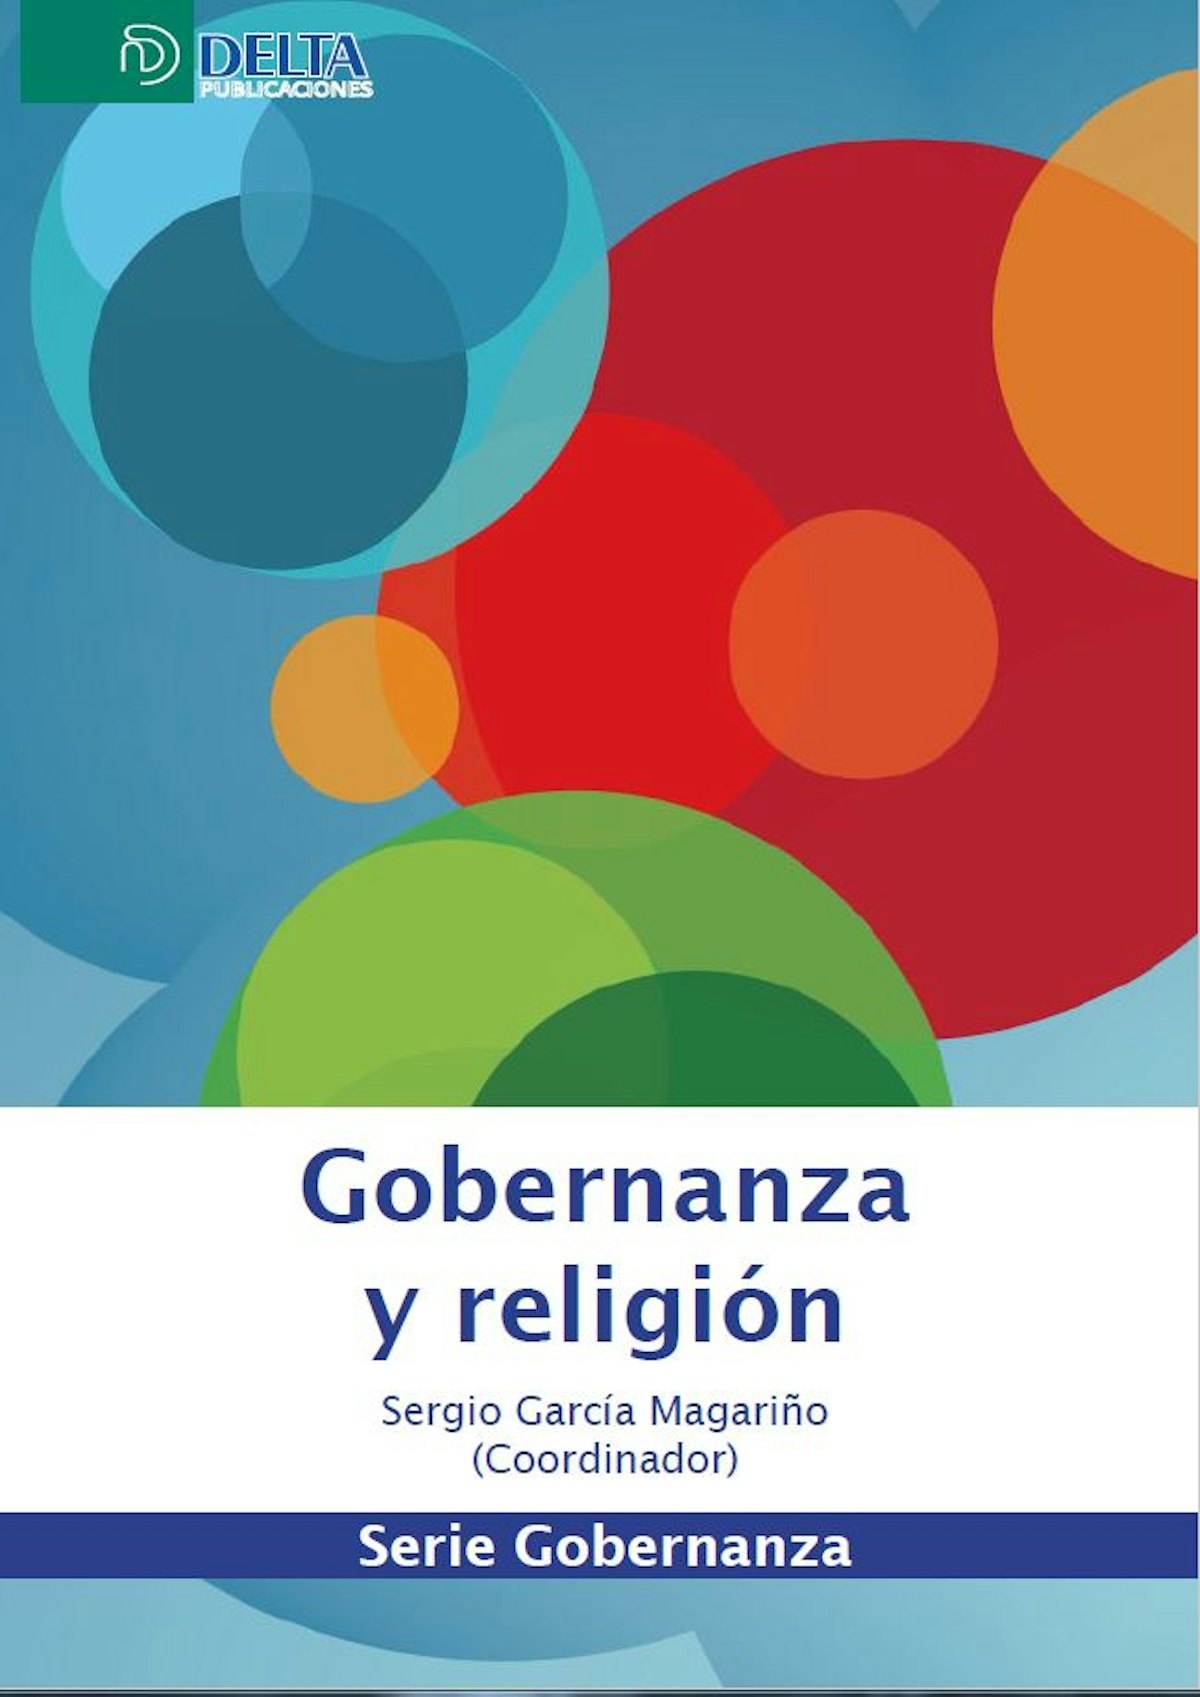 Recently published Gobernanza y religion (Governance and religion) compiles contributions from leaders of thought in Spain on just and peaceful forms of social organization.